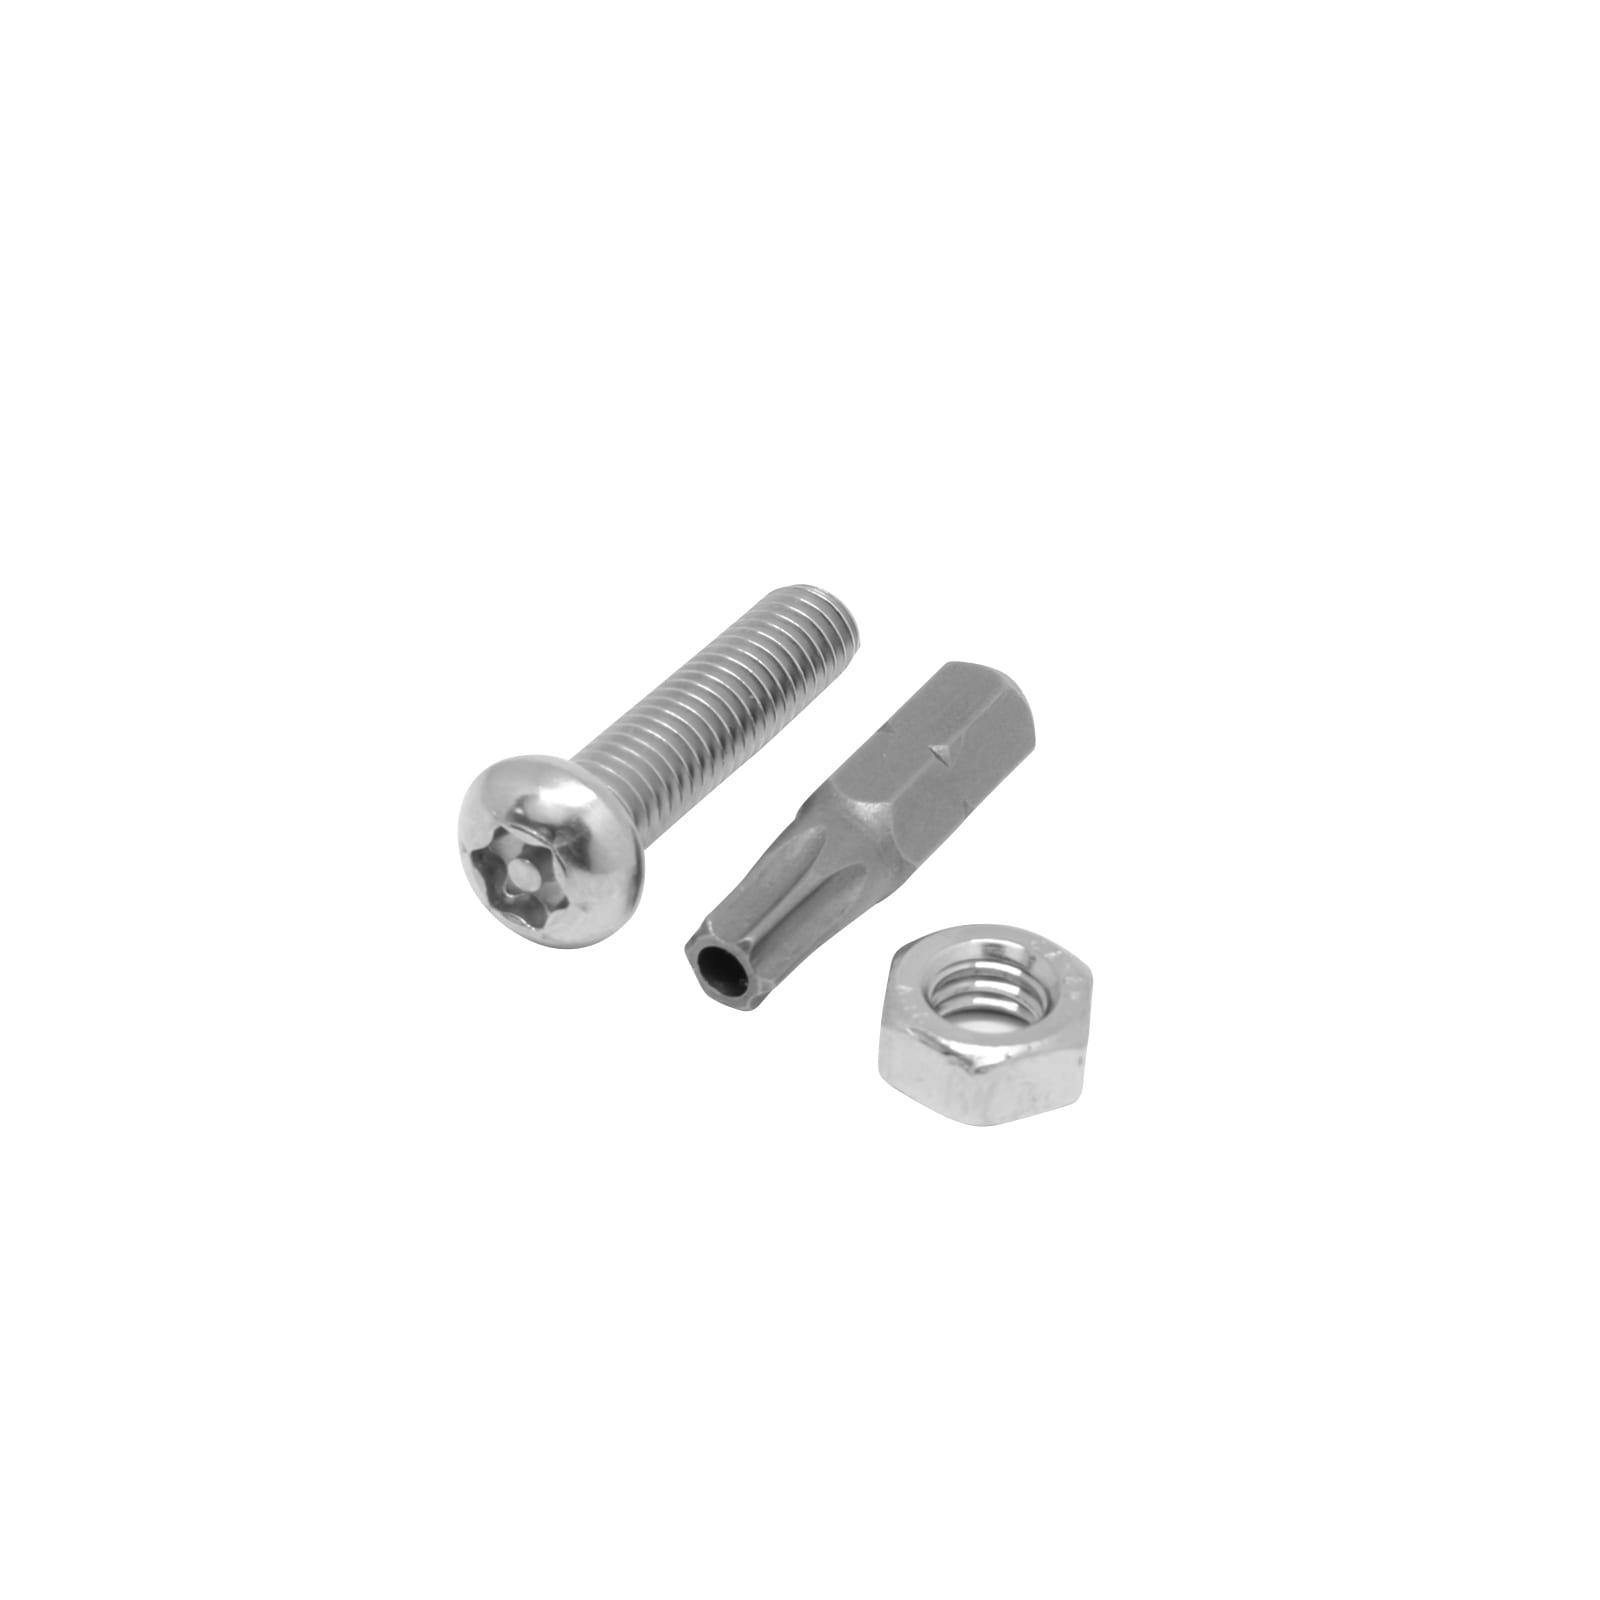 SECURITY BOLT M6 - 1 x 35 STAINLESS STEEL ROUND HEAD